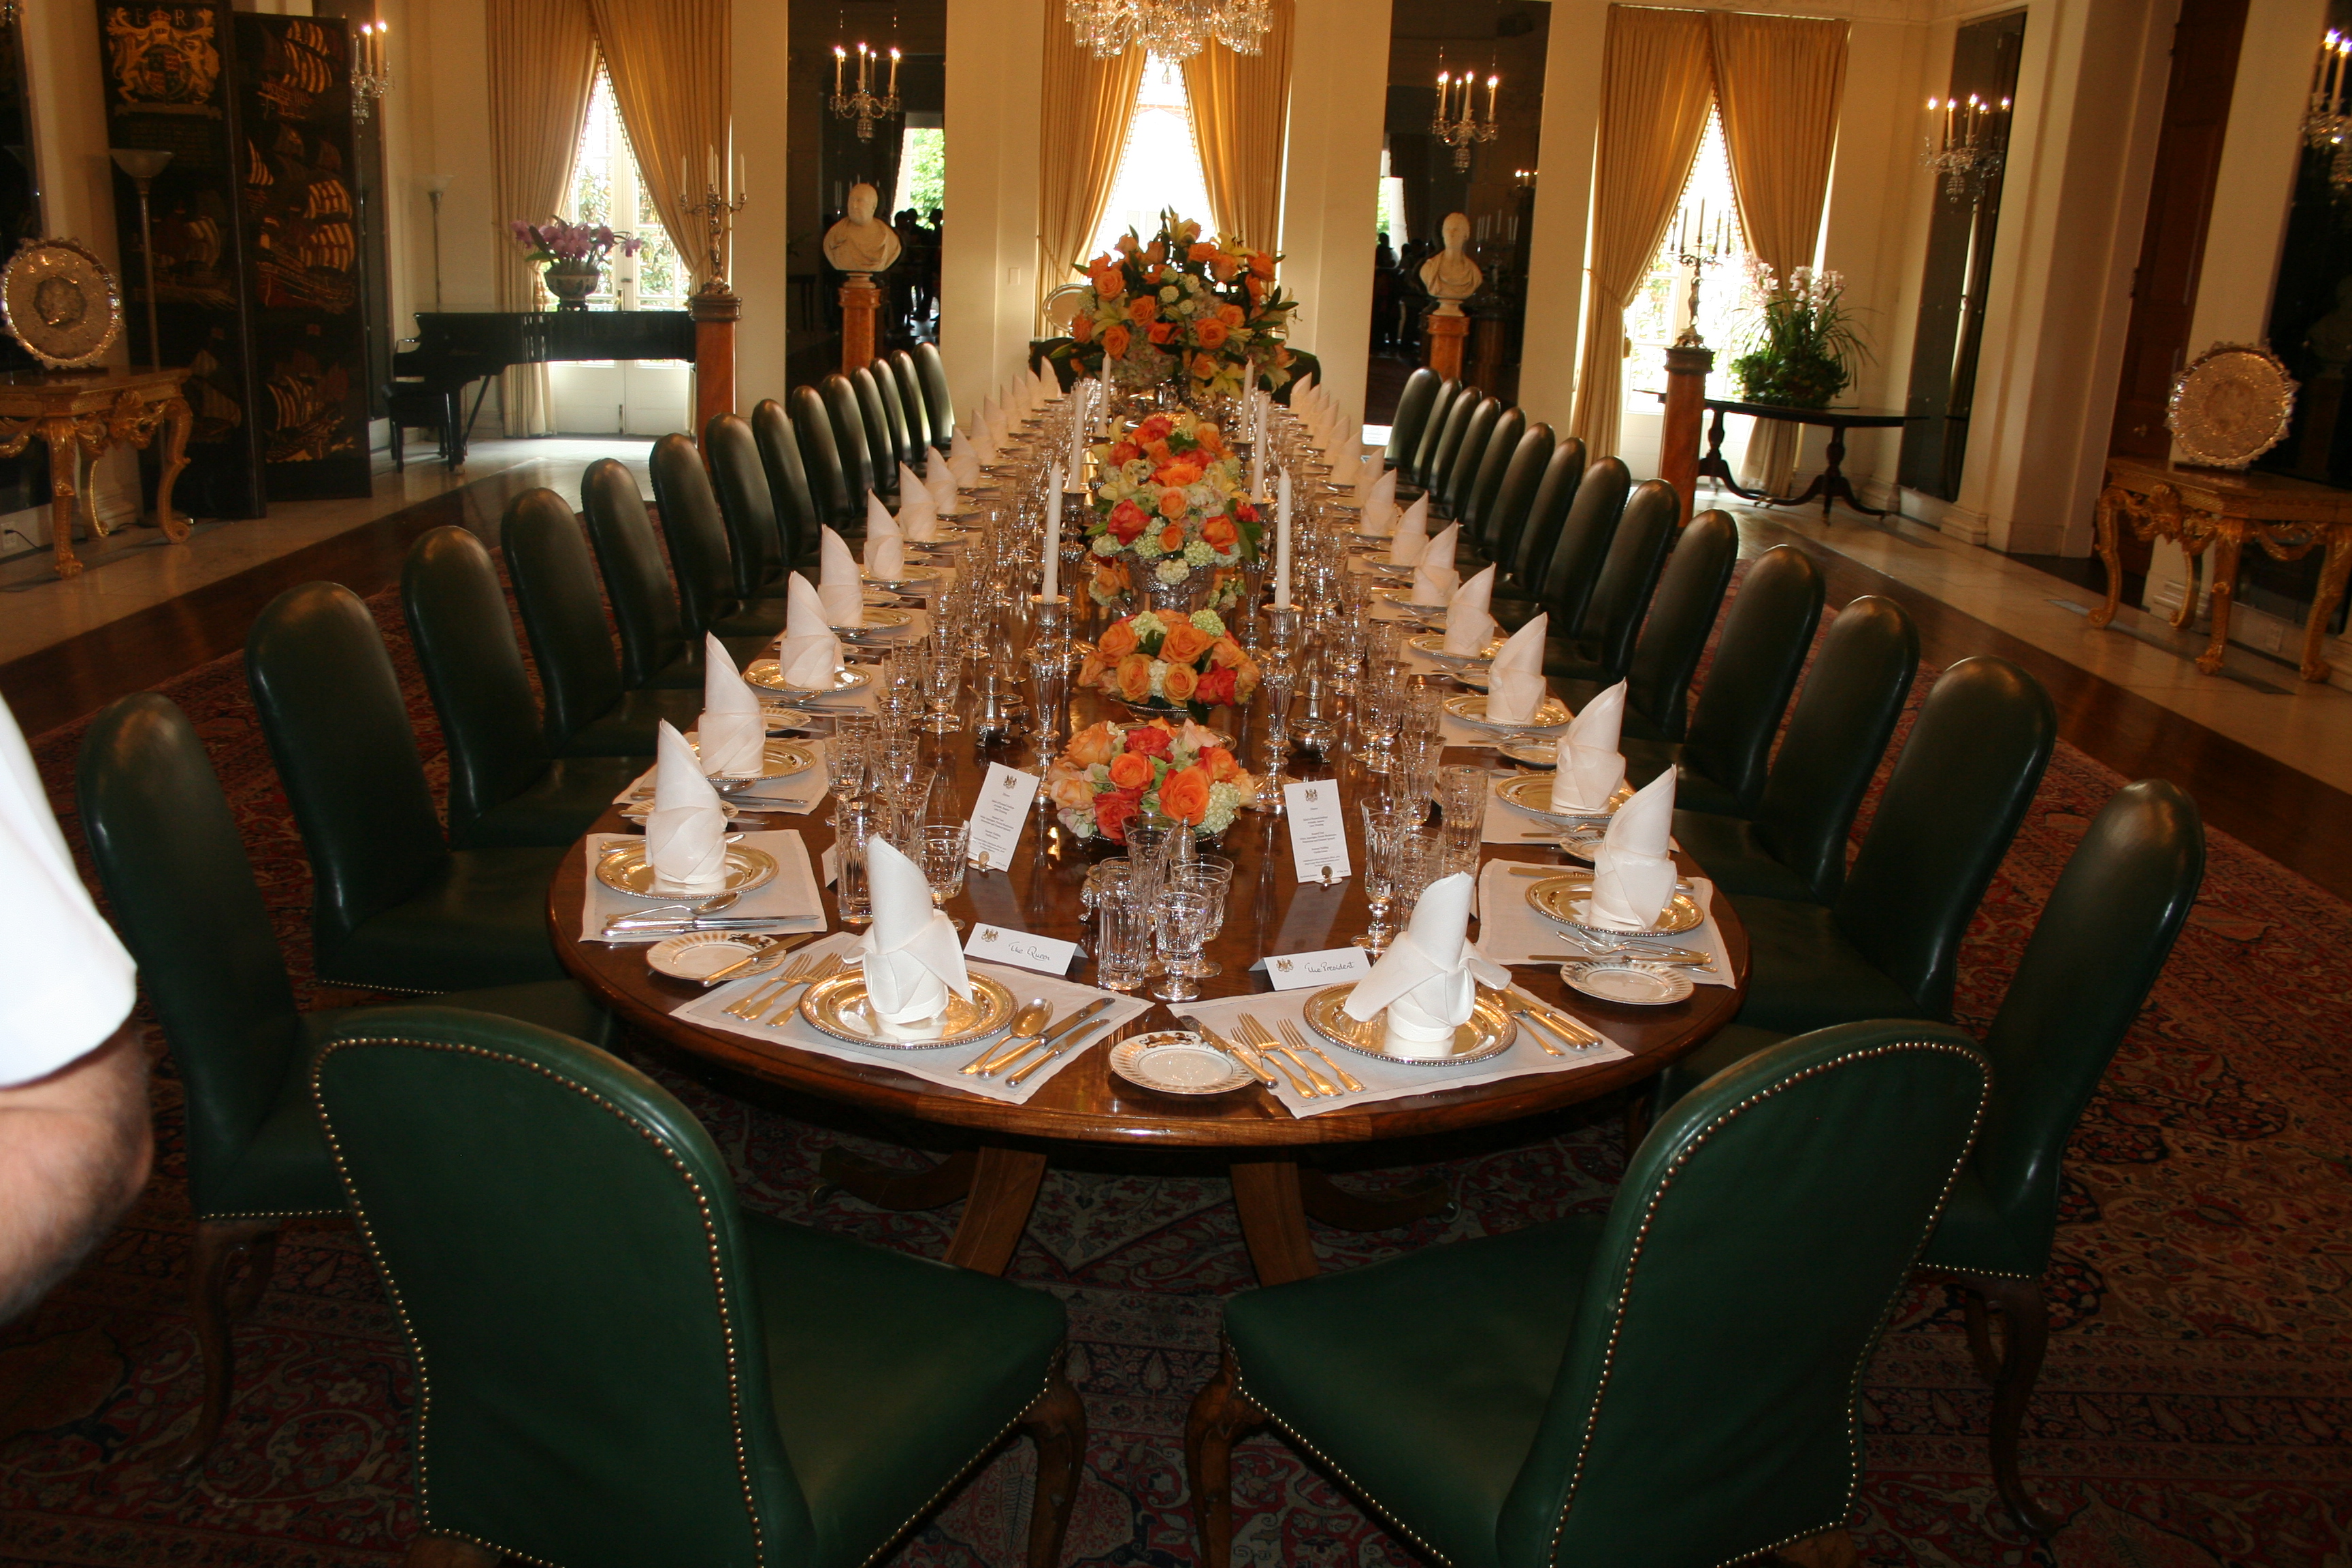 The state dining room at the British Embassy. (Photo: Mark Heckathorn/DC on Heels)